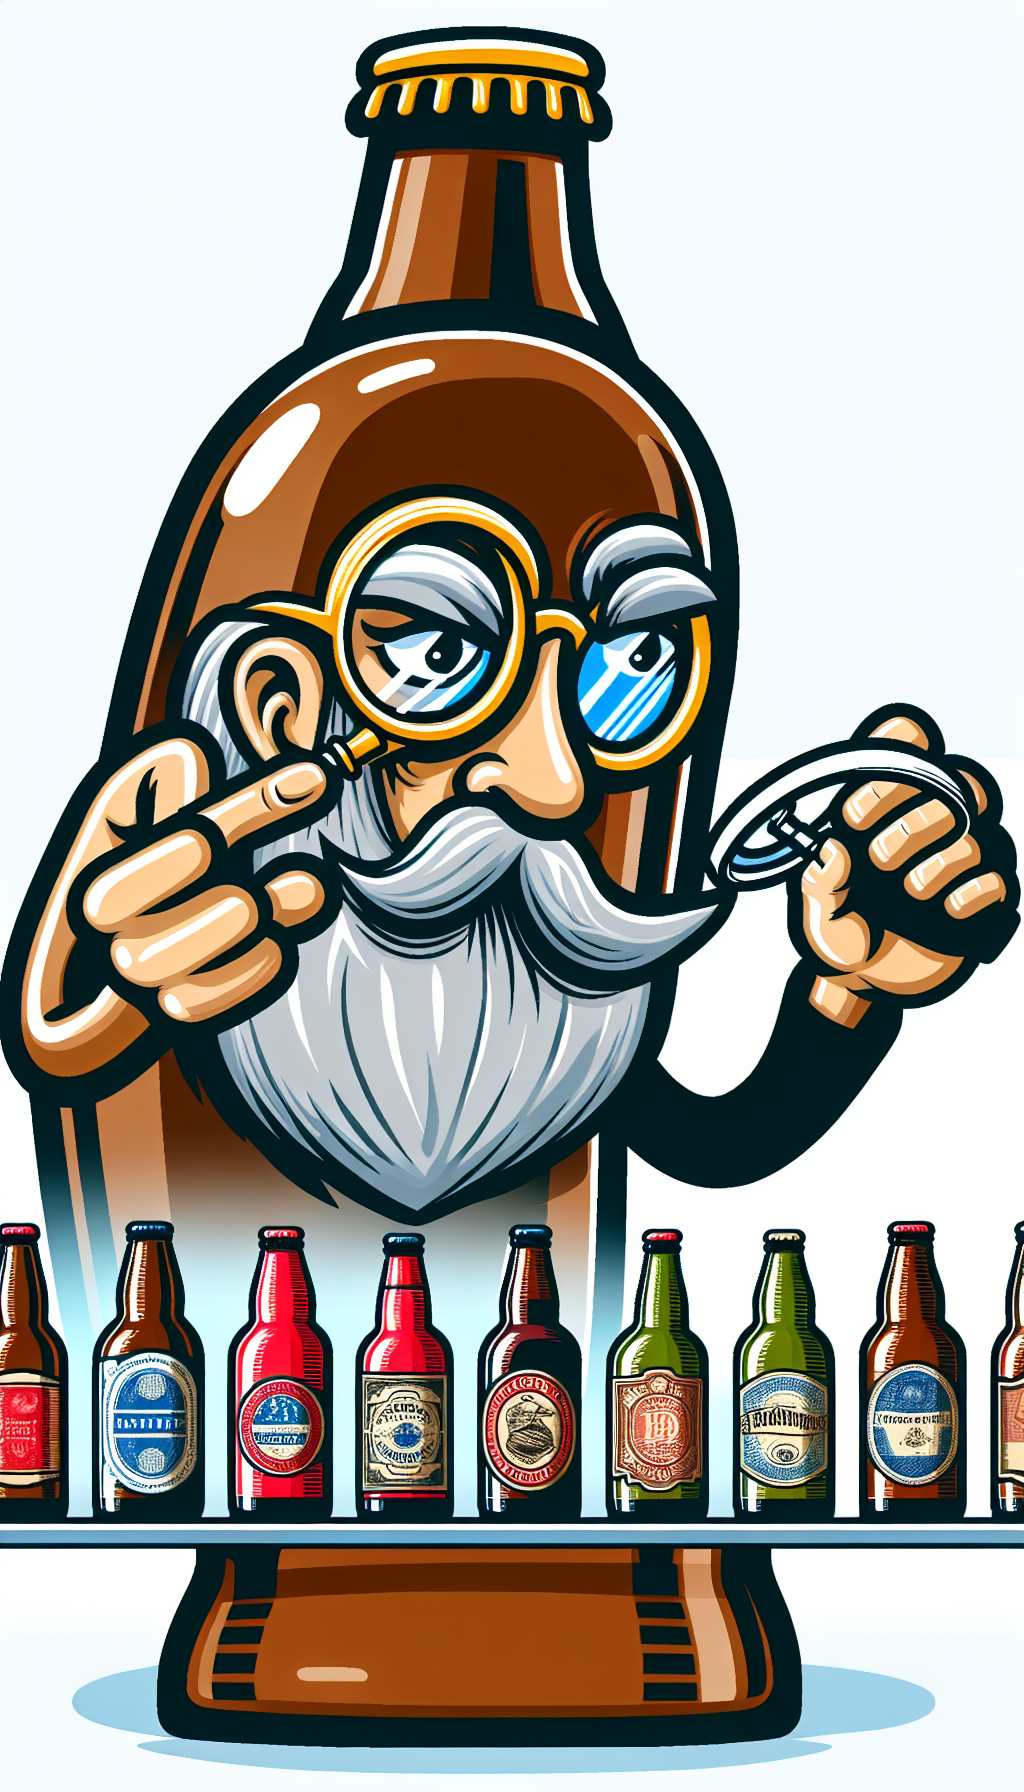 An illustration displays a wise, monocled beer bottle adorned with a gray beard, holding a magnifying glass to examine a line of younger, vibrant beer bottles, each bearing a distinctive era-specific label design. The magnifying glass highlights details such as the bottle's shape, embossing, and label artwork, emphasizing the theme of 'old beer bottle identification.'